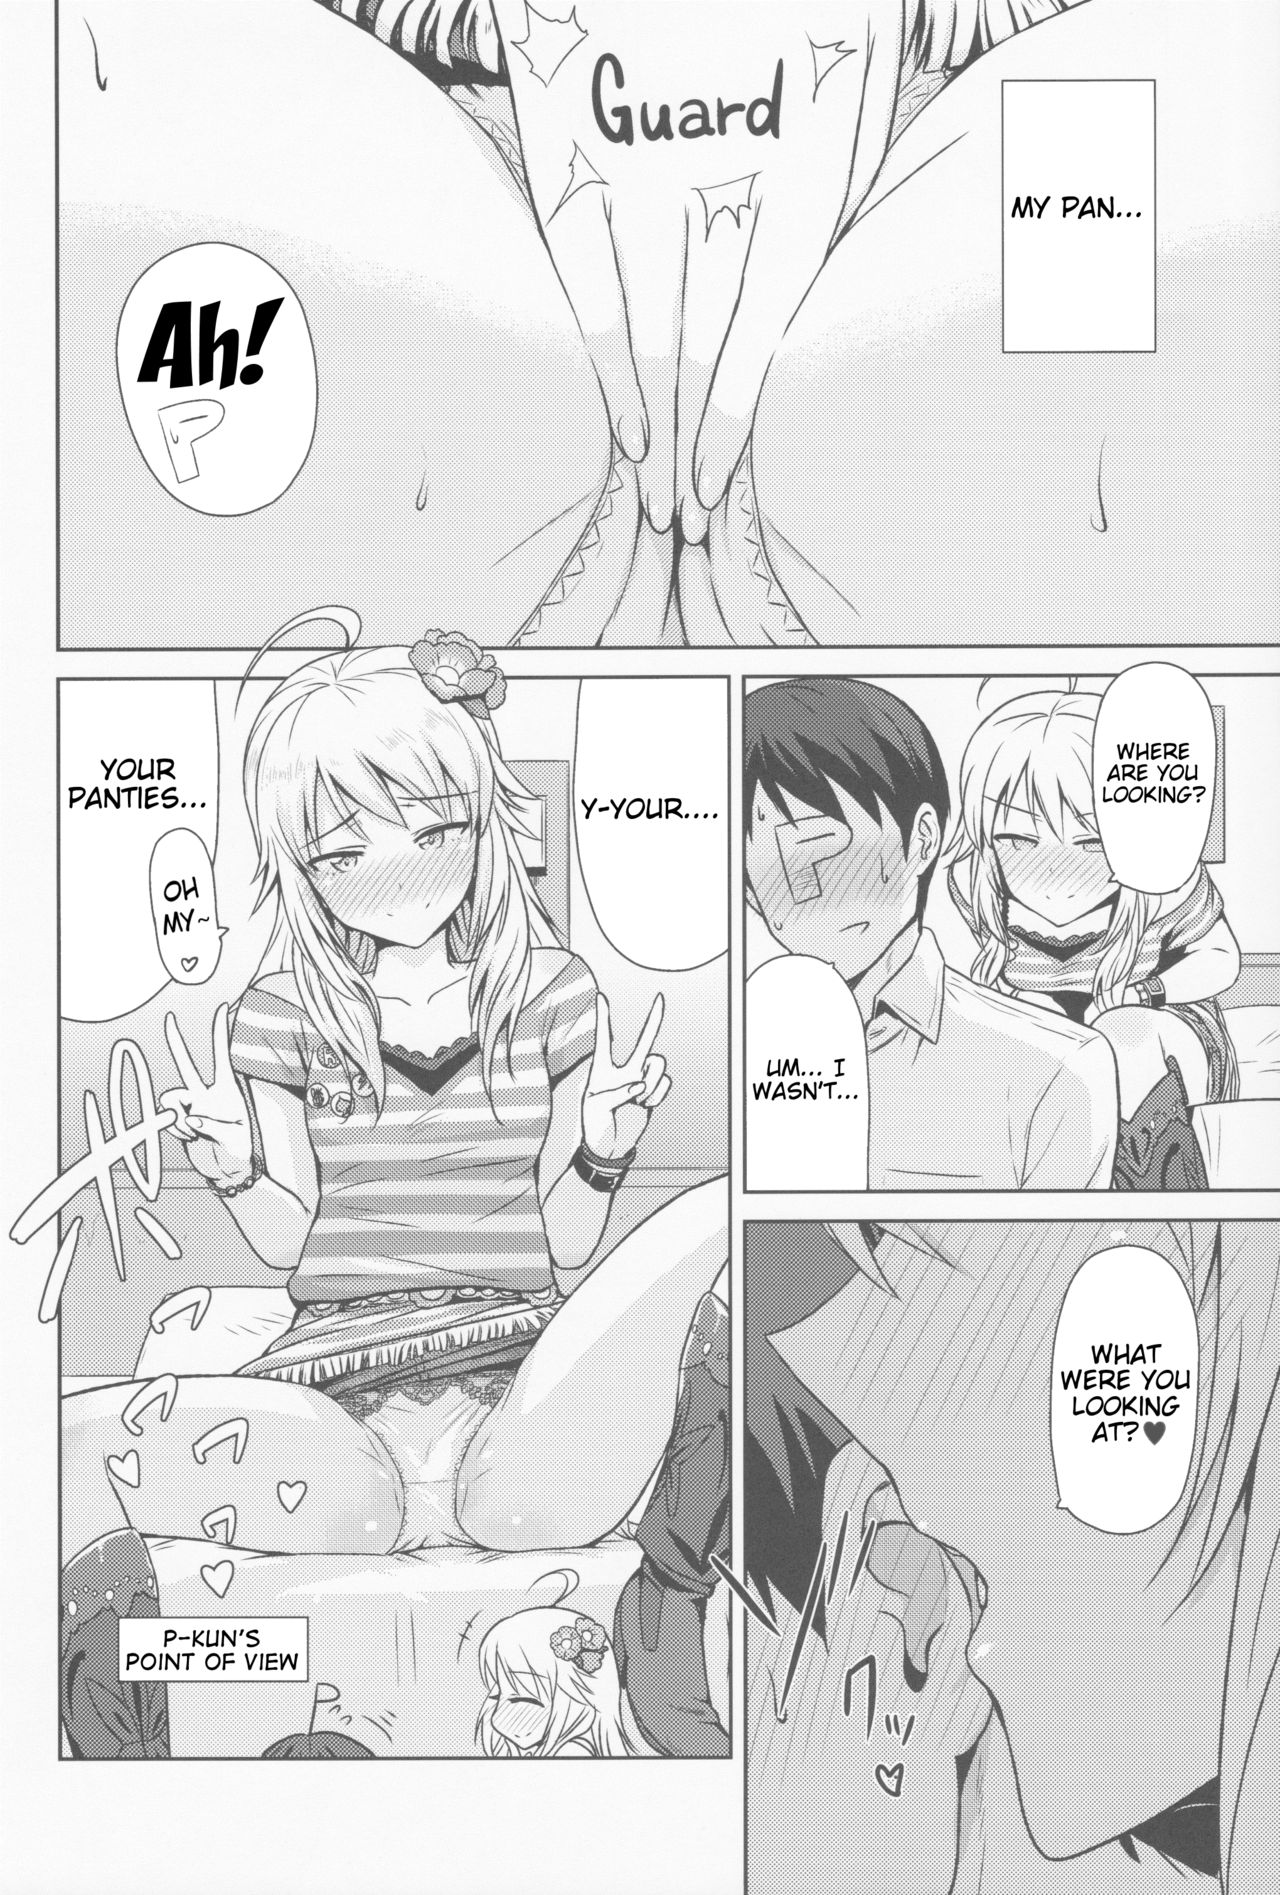 (MarionetteAngel2013) [PLANT (Tsurui)] Oshiete MY HONEY (THE IDOLM@STER) [English] {doujin-moe.us} page 15 full